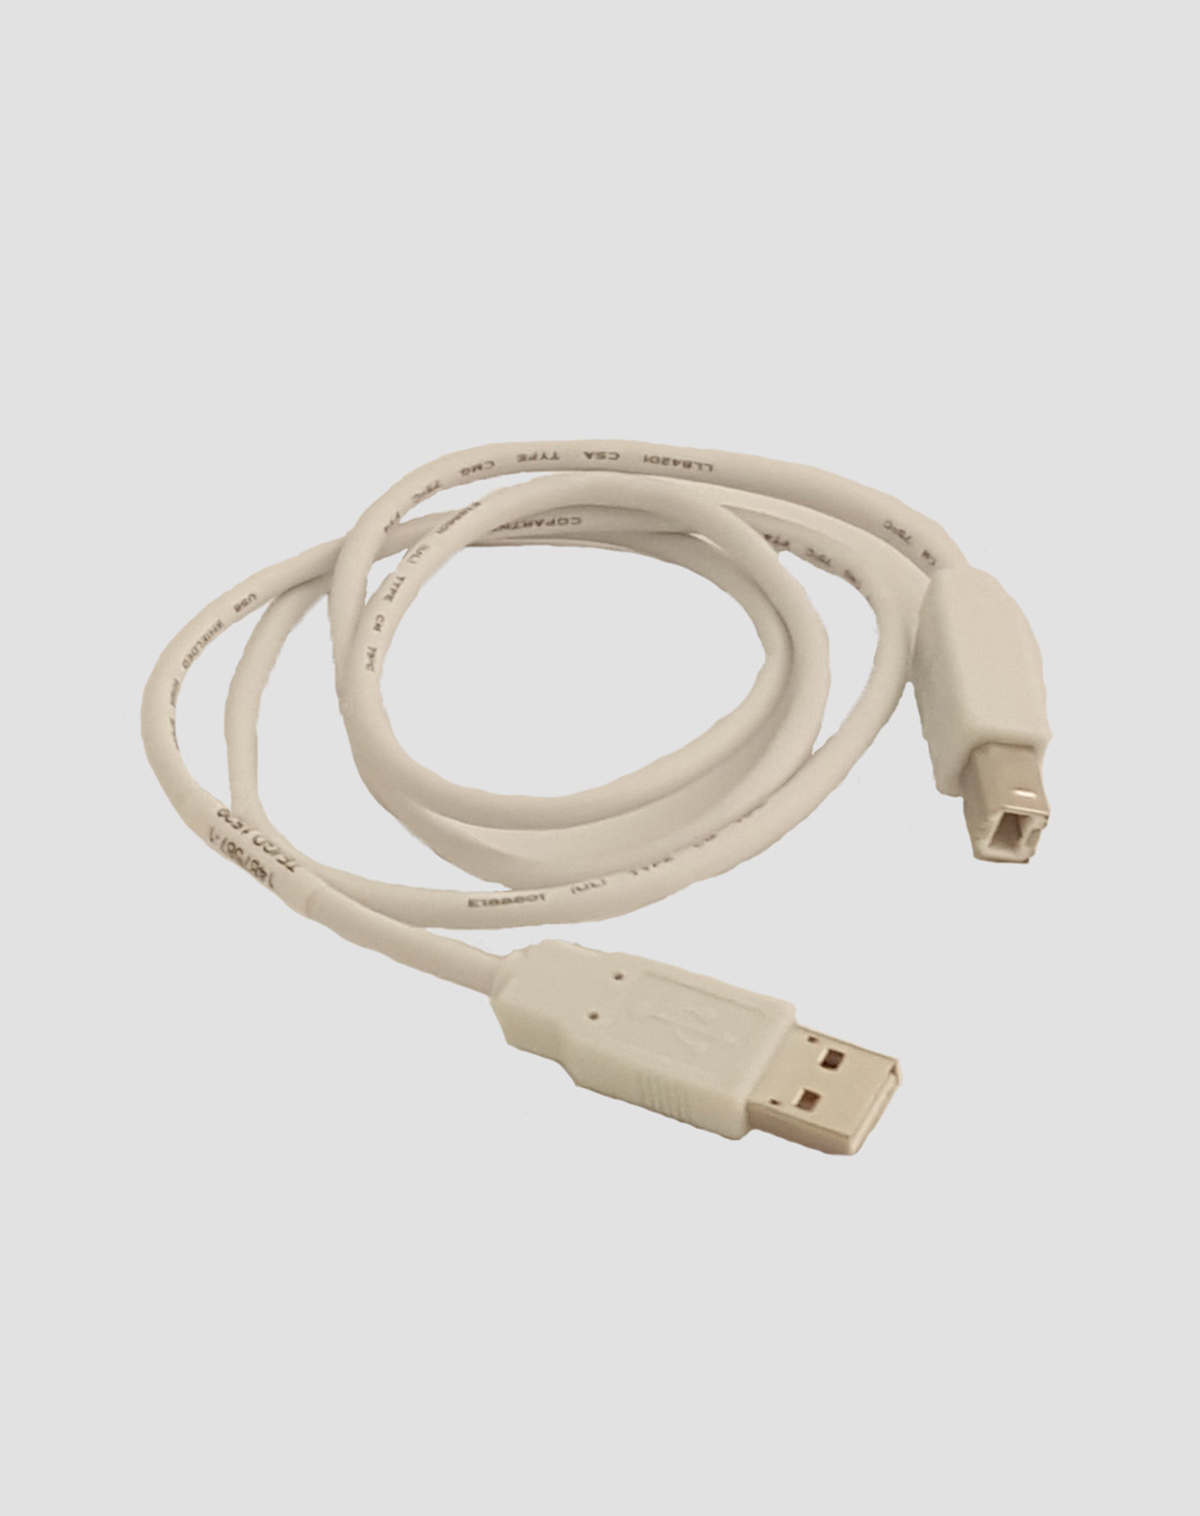 AT7P™ USB-Cable